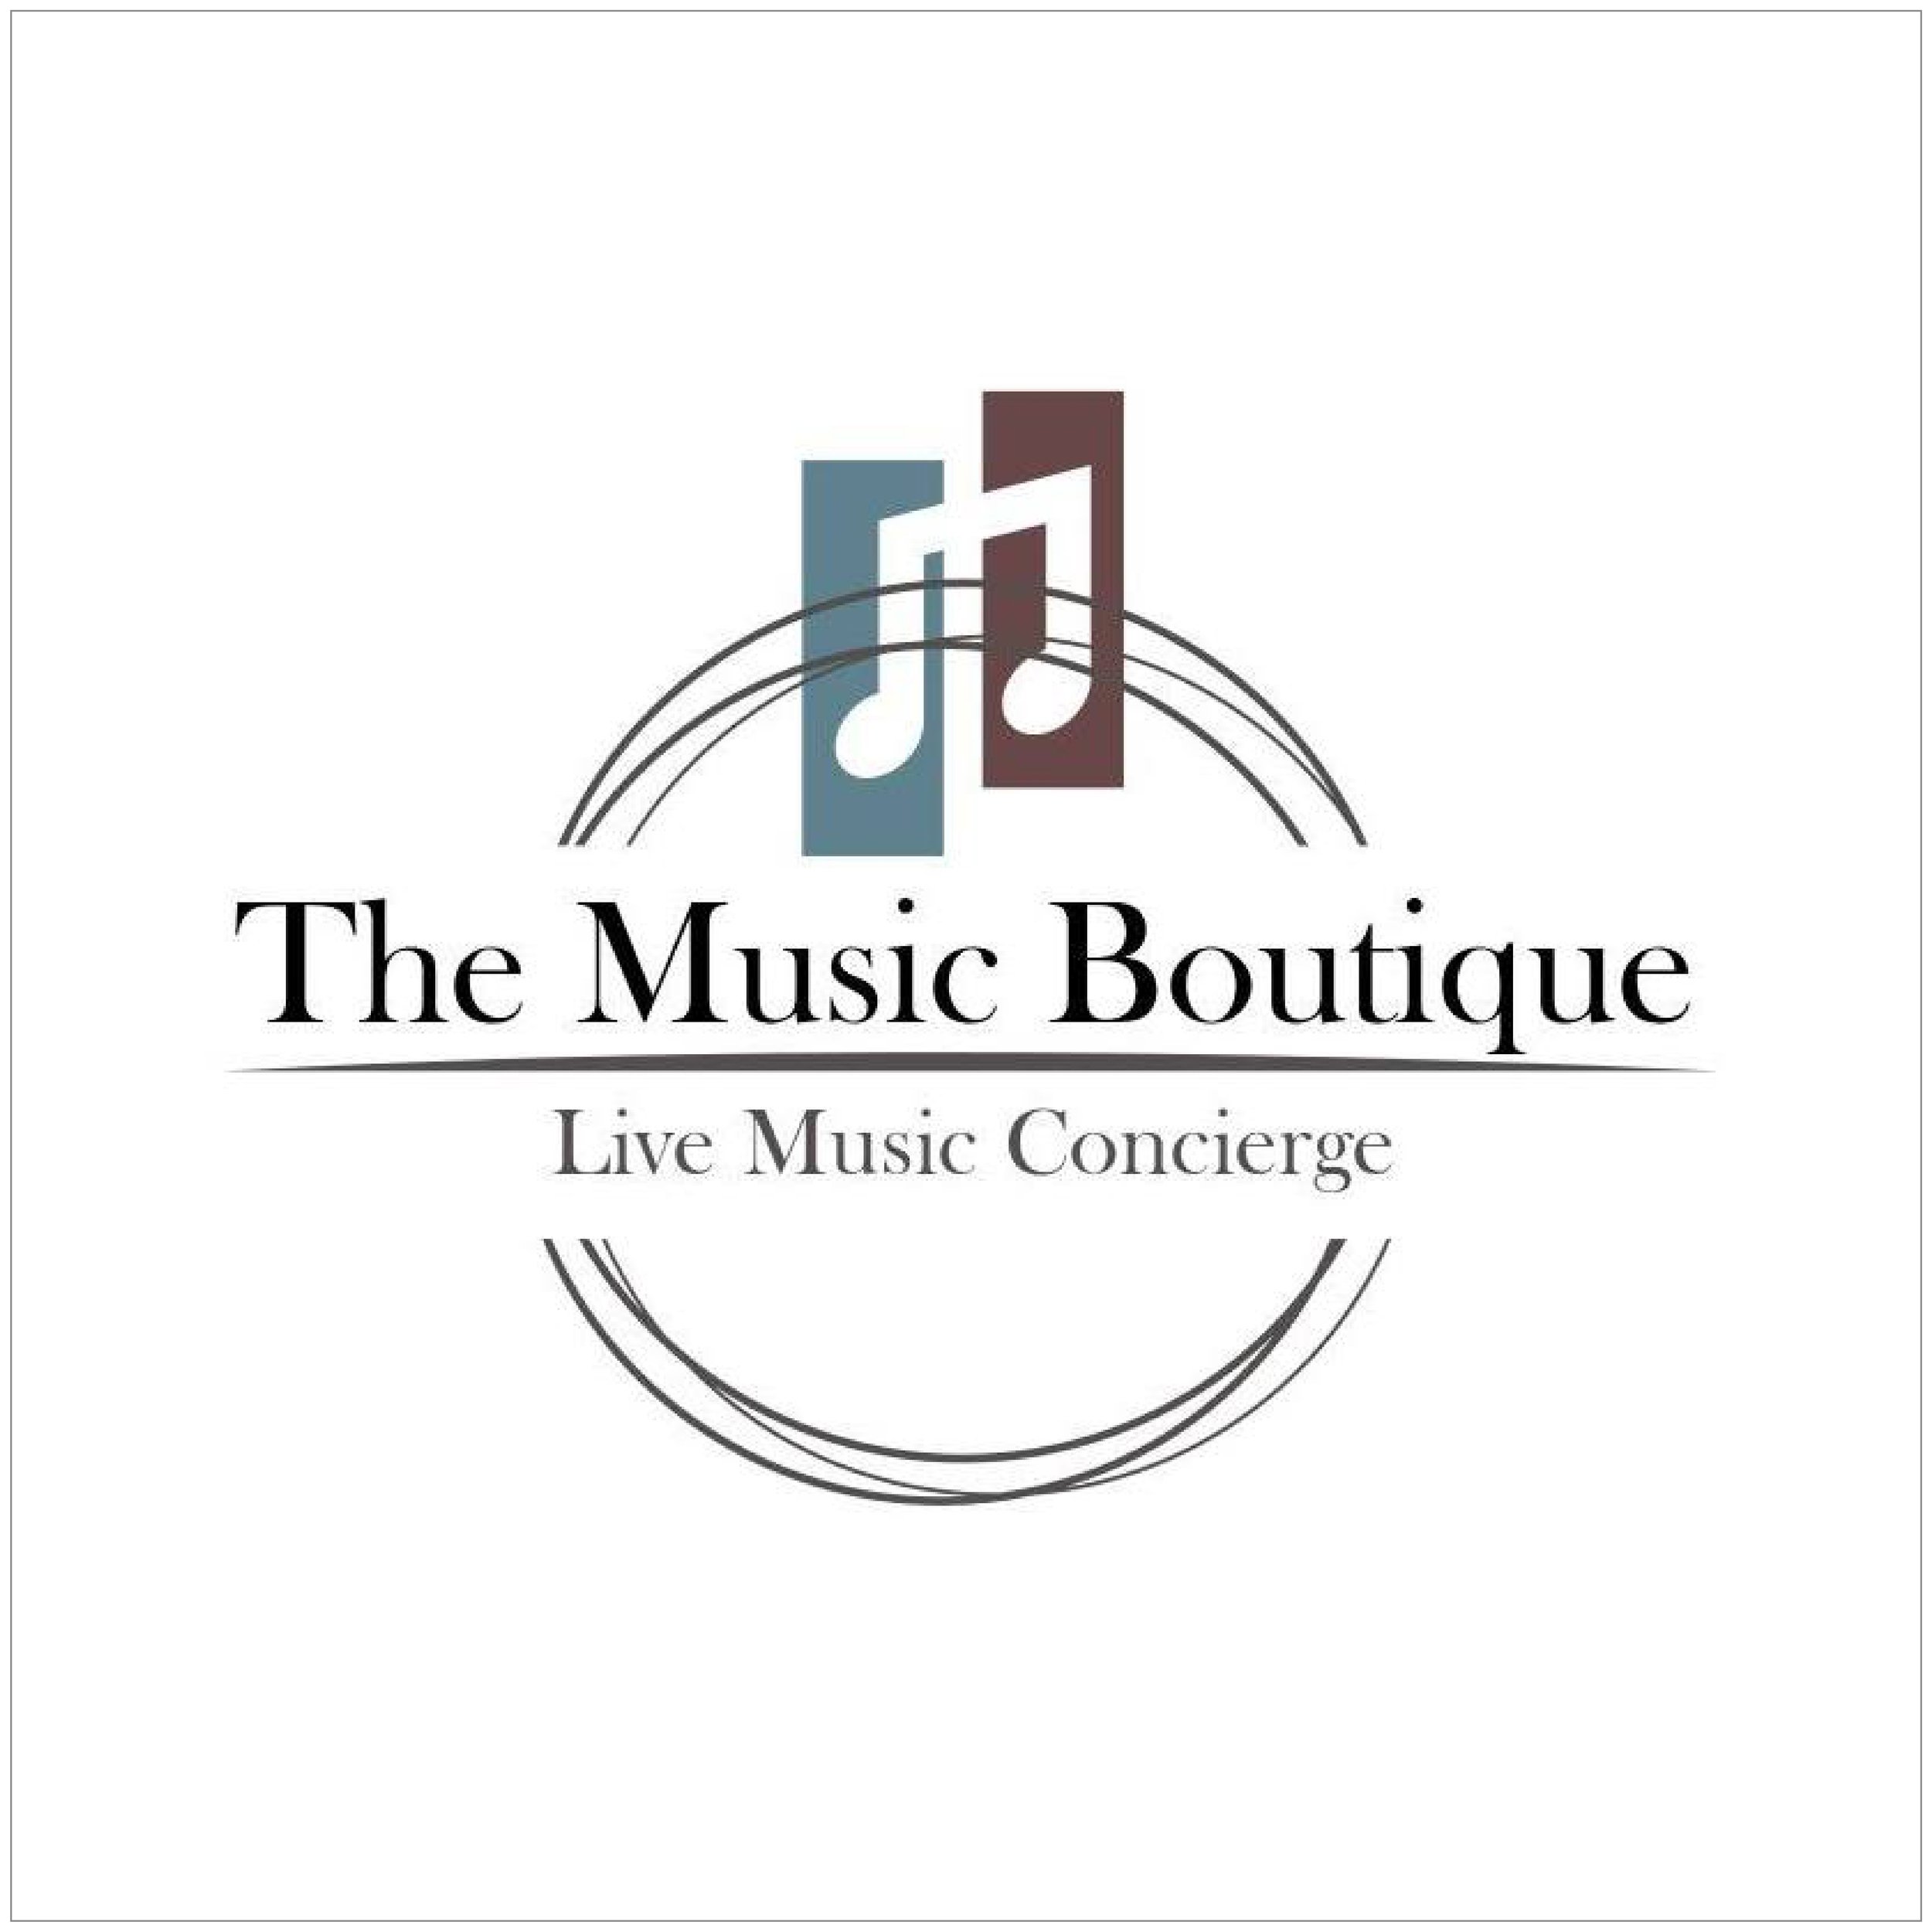 THE MUSIC BOUTIQUE